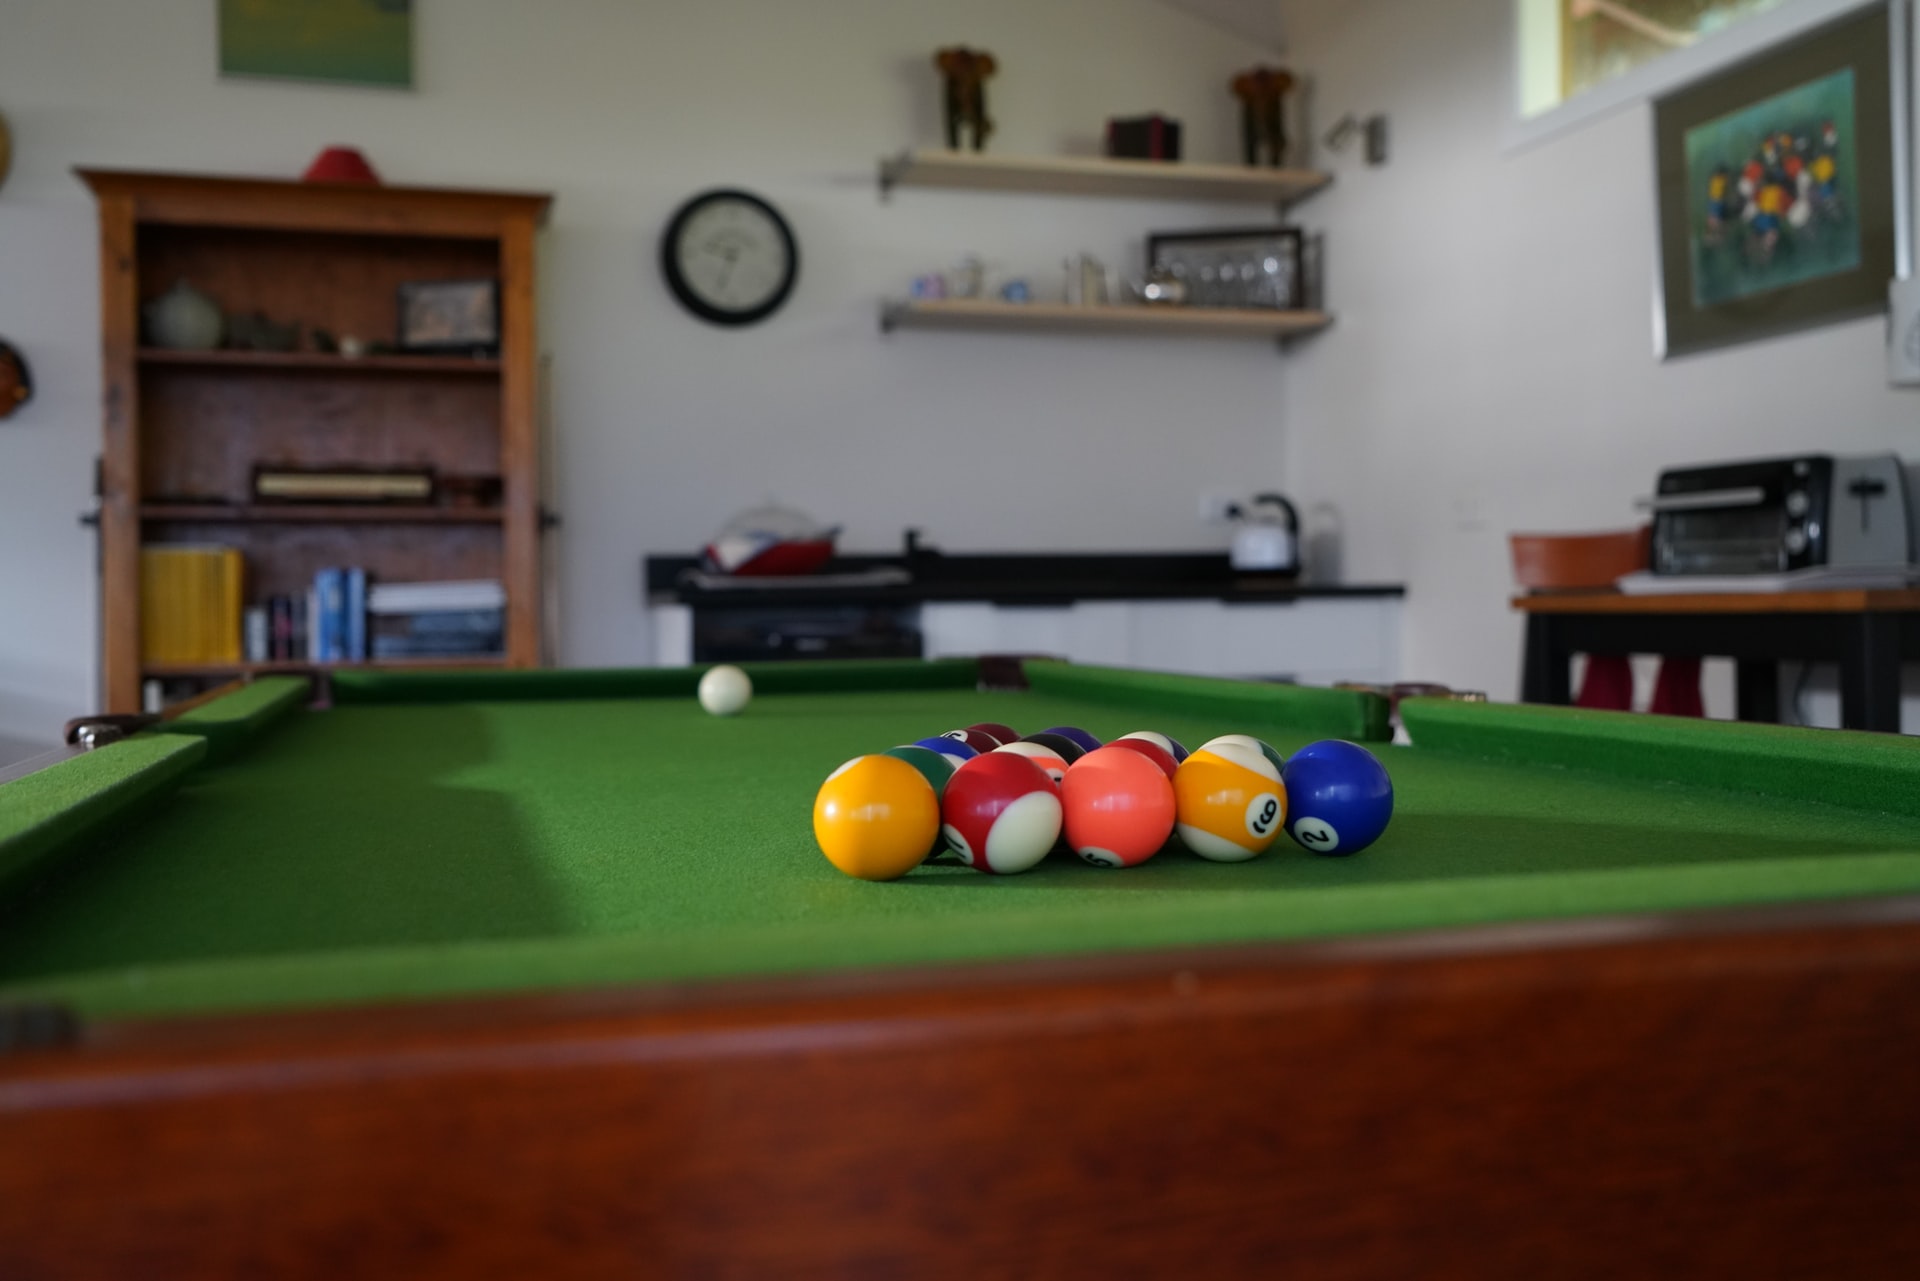 How much does it cost to have a pool table Refelted?